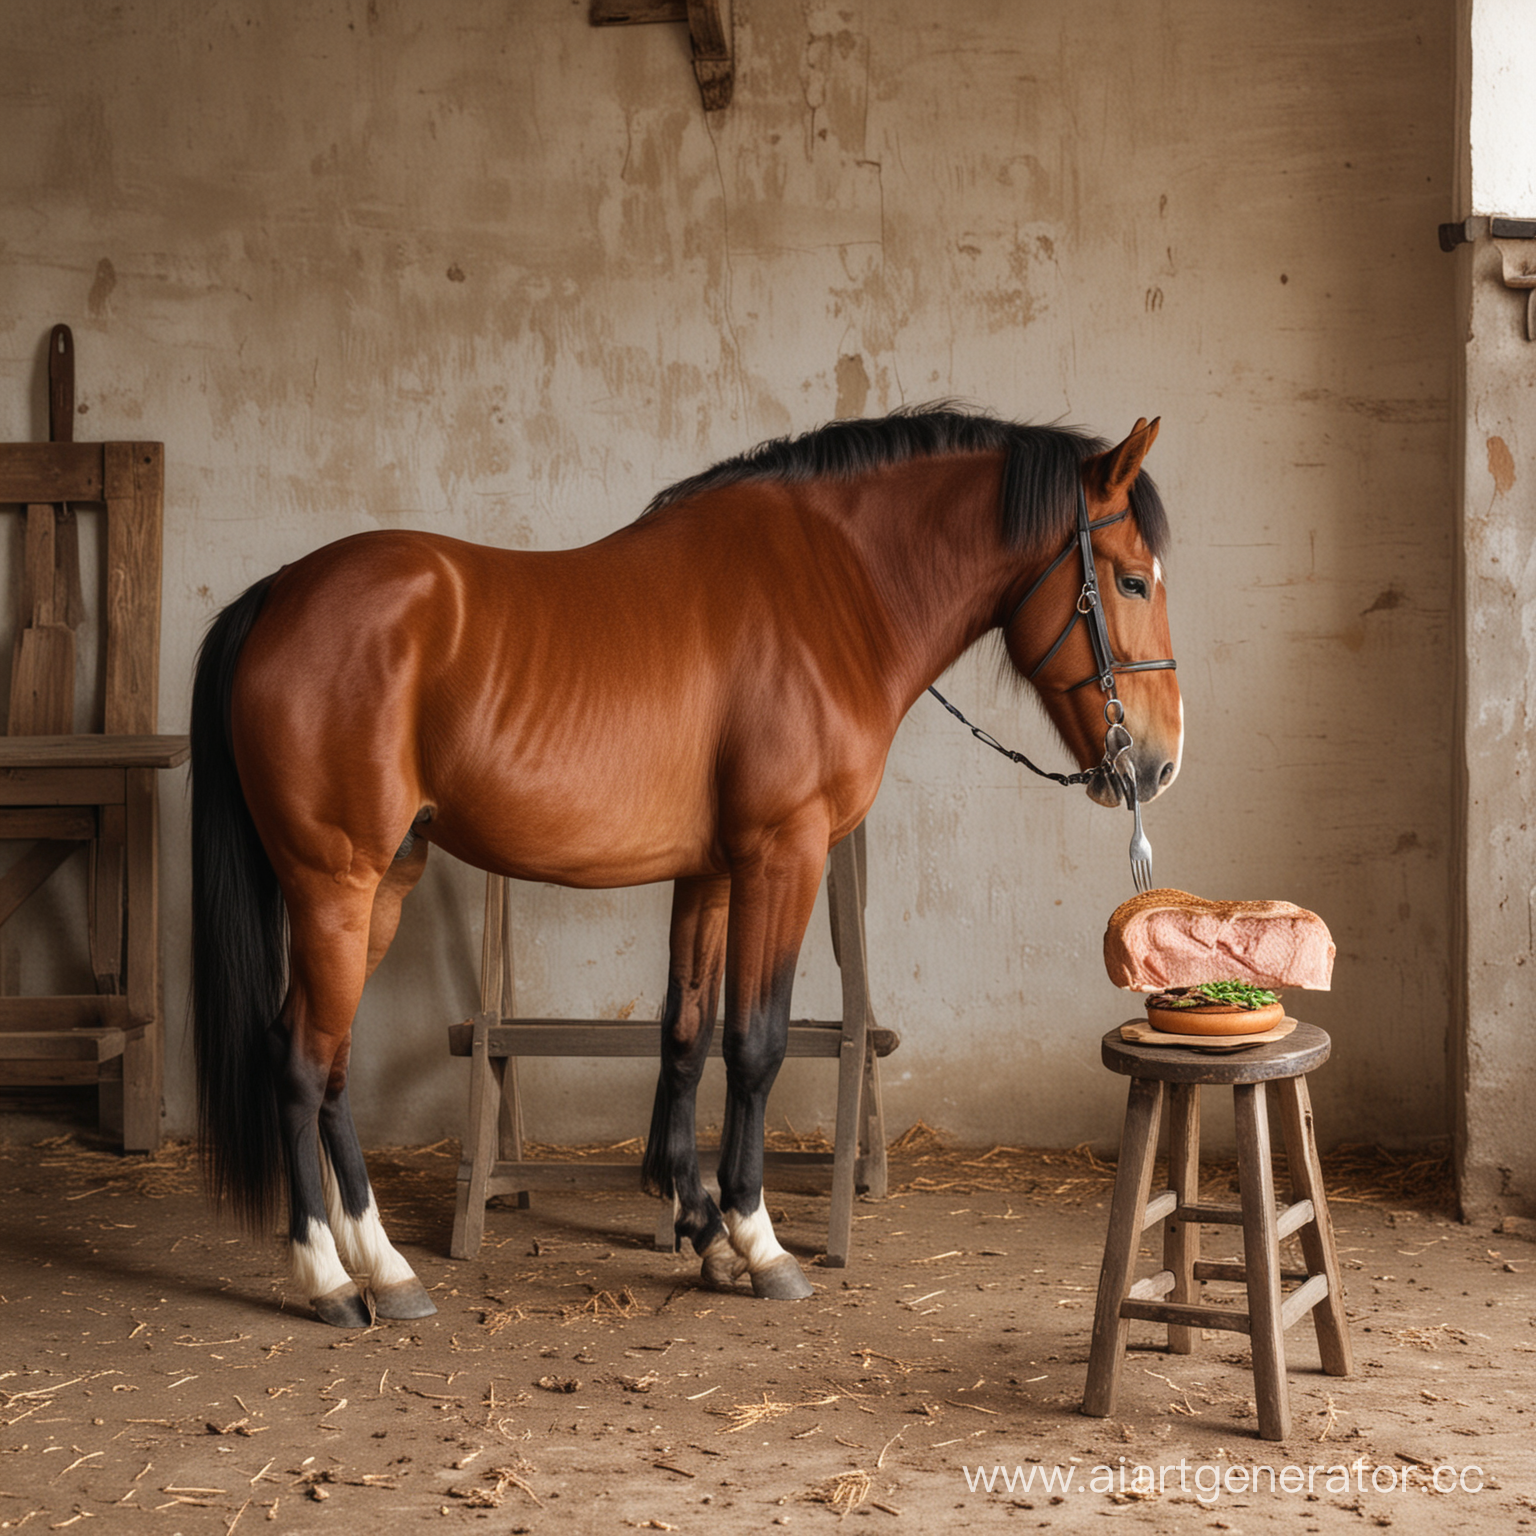 A horse sits on a stool and eats a huge cutlet with a fork